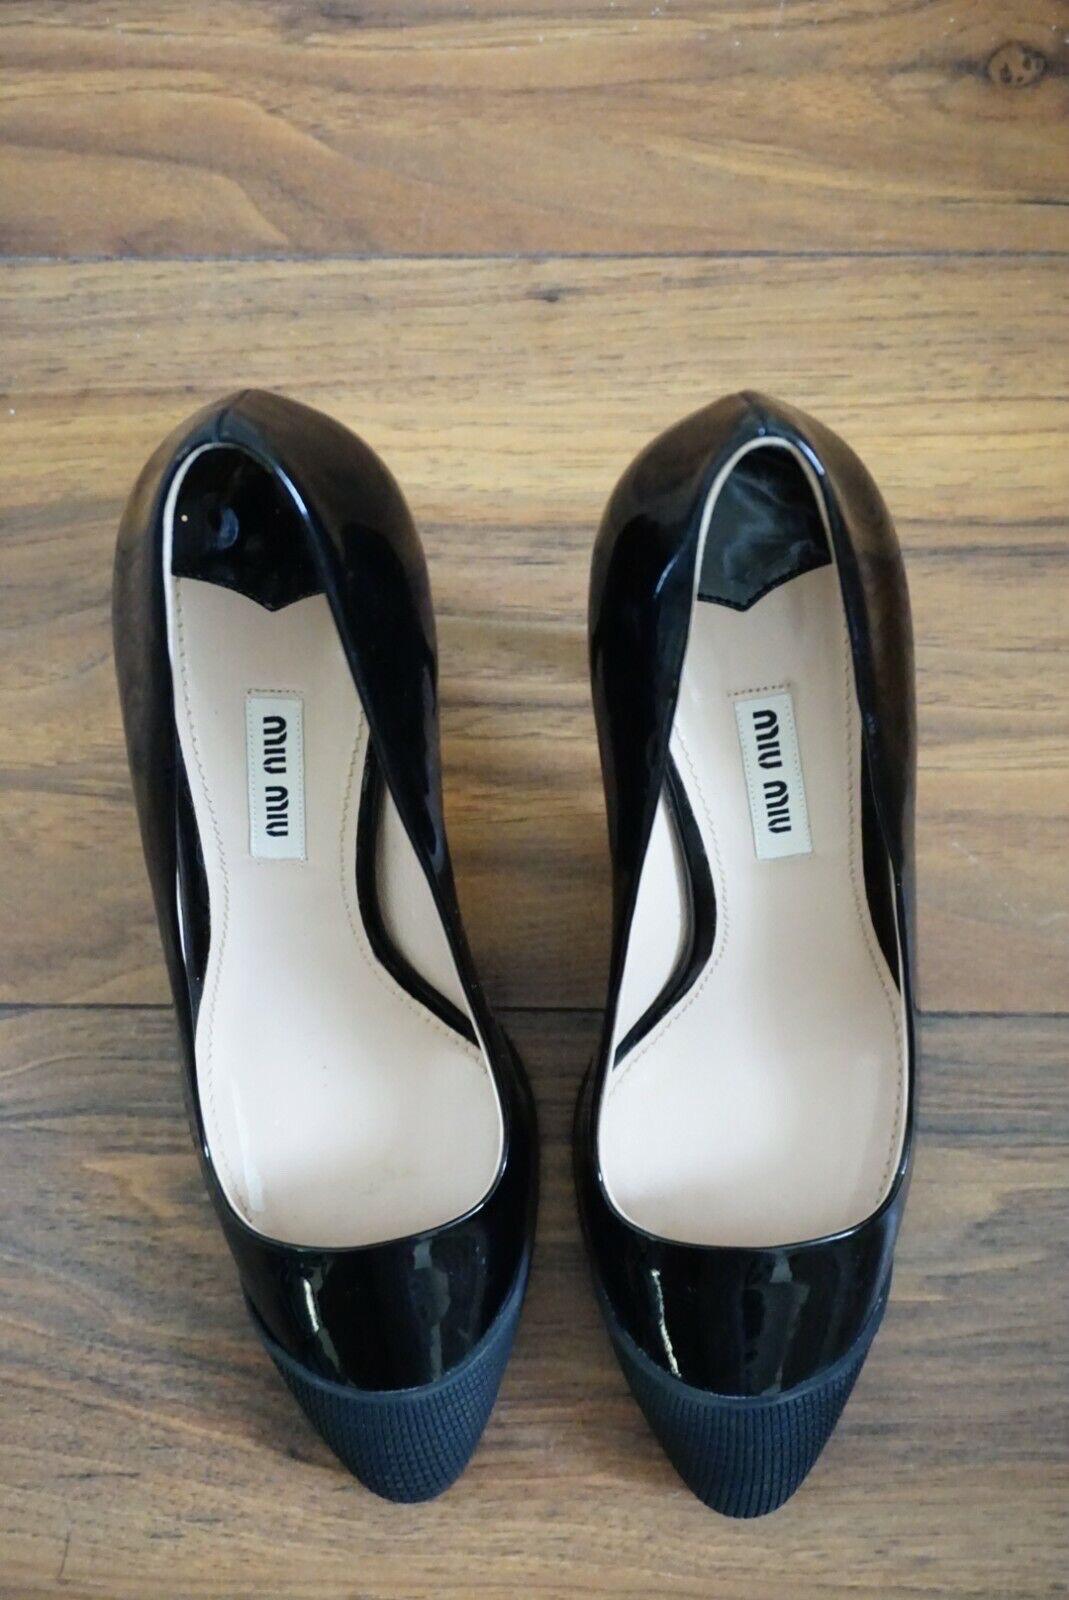 Miu Miu Vernice Patent Leather Pointed Heels Rubber Grip Soles Black 37.5 BNWT For Sale 2